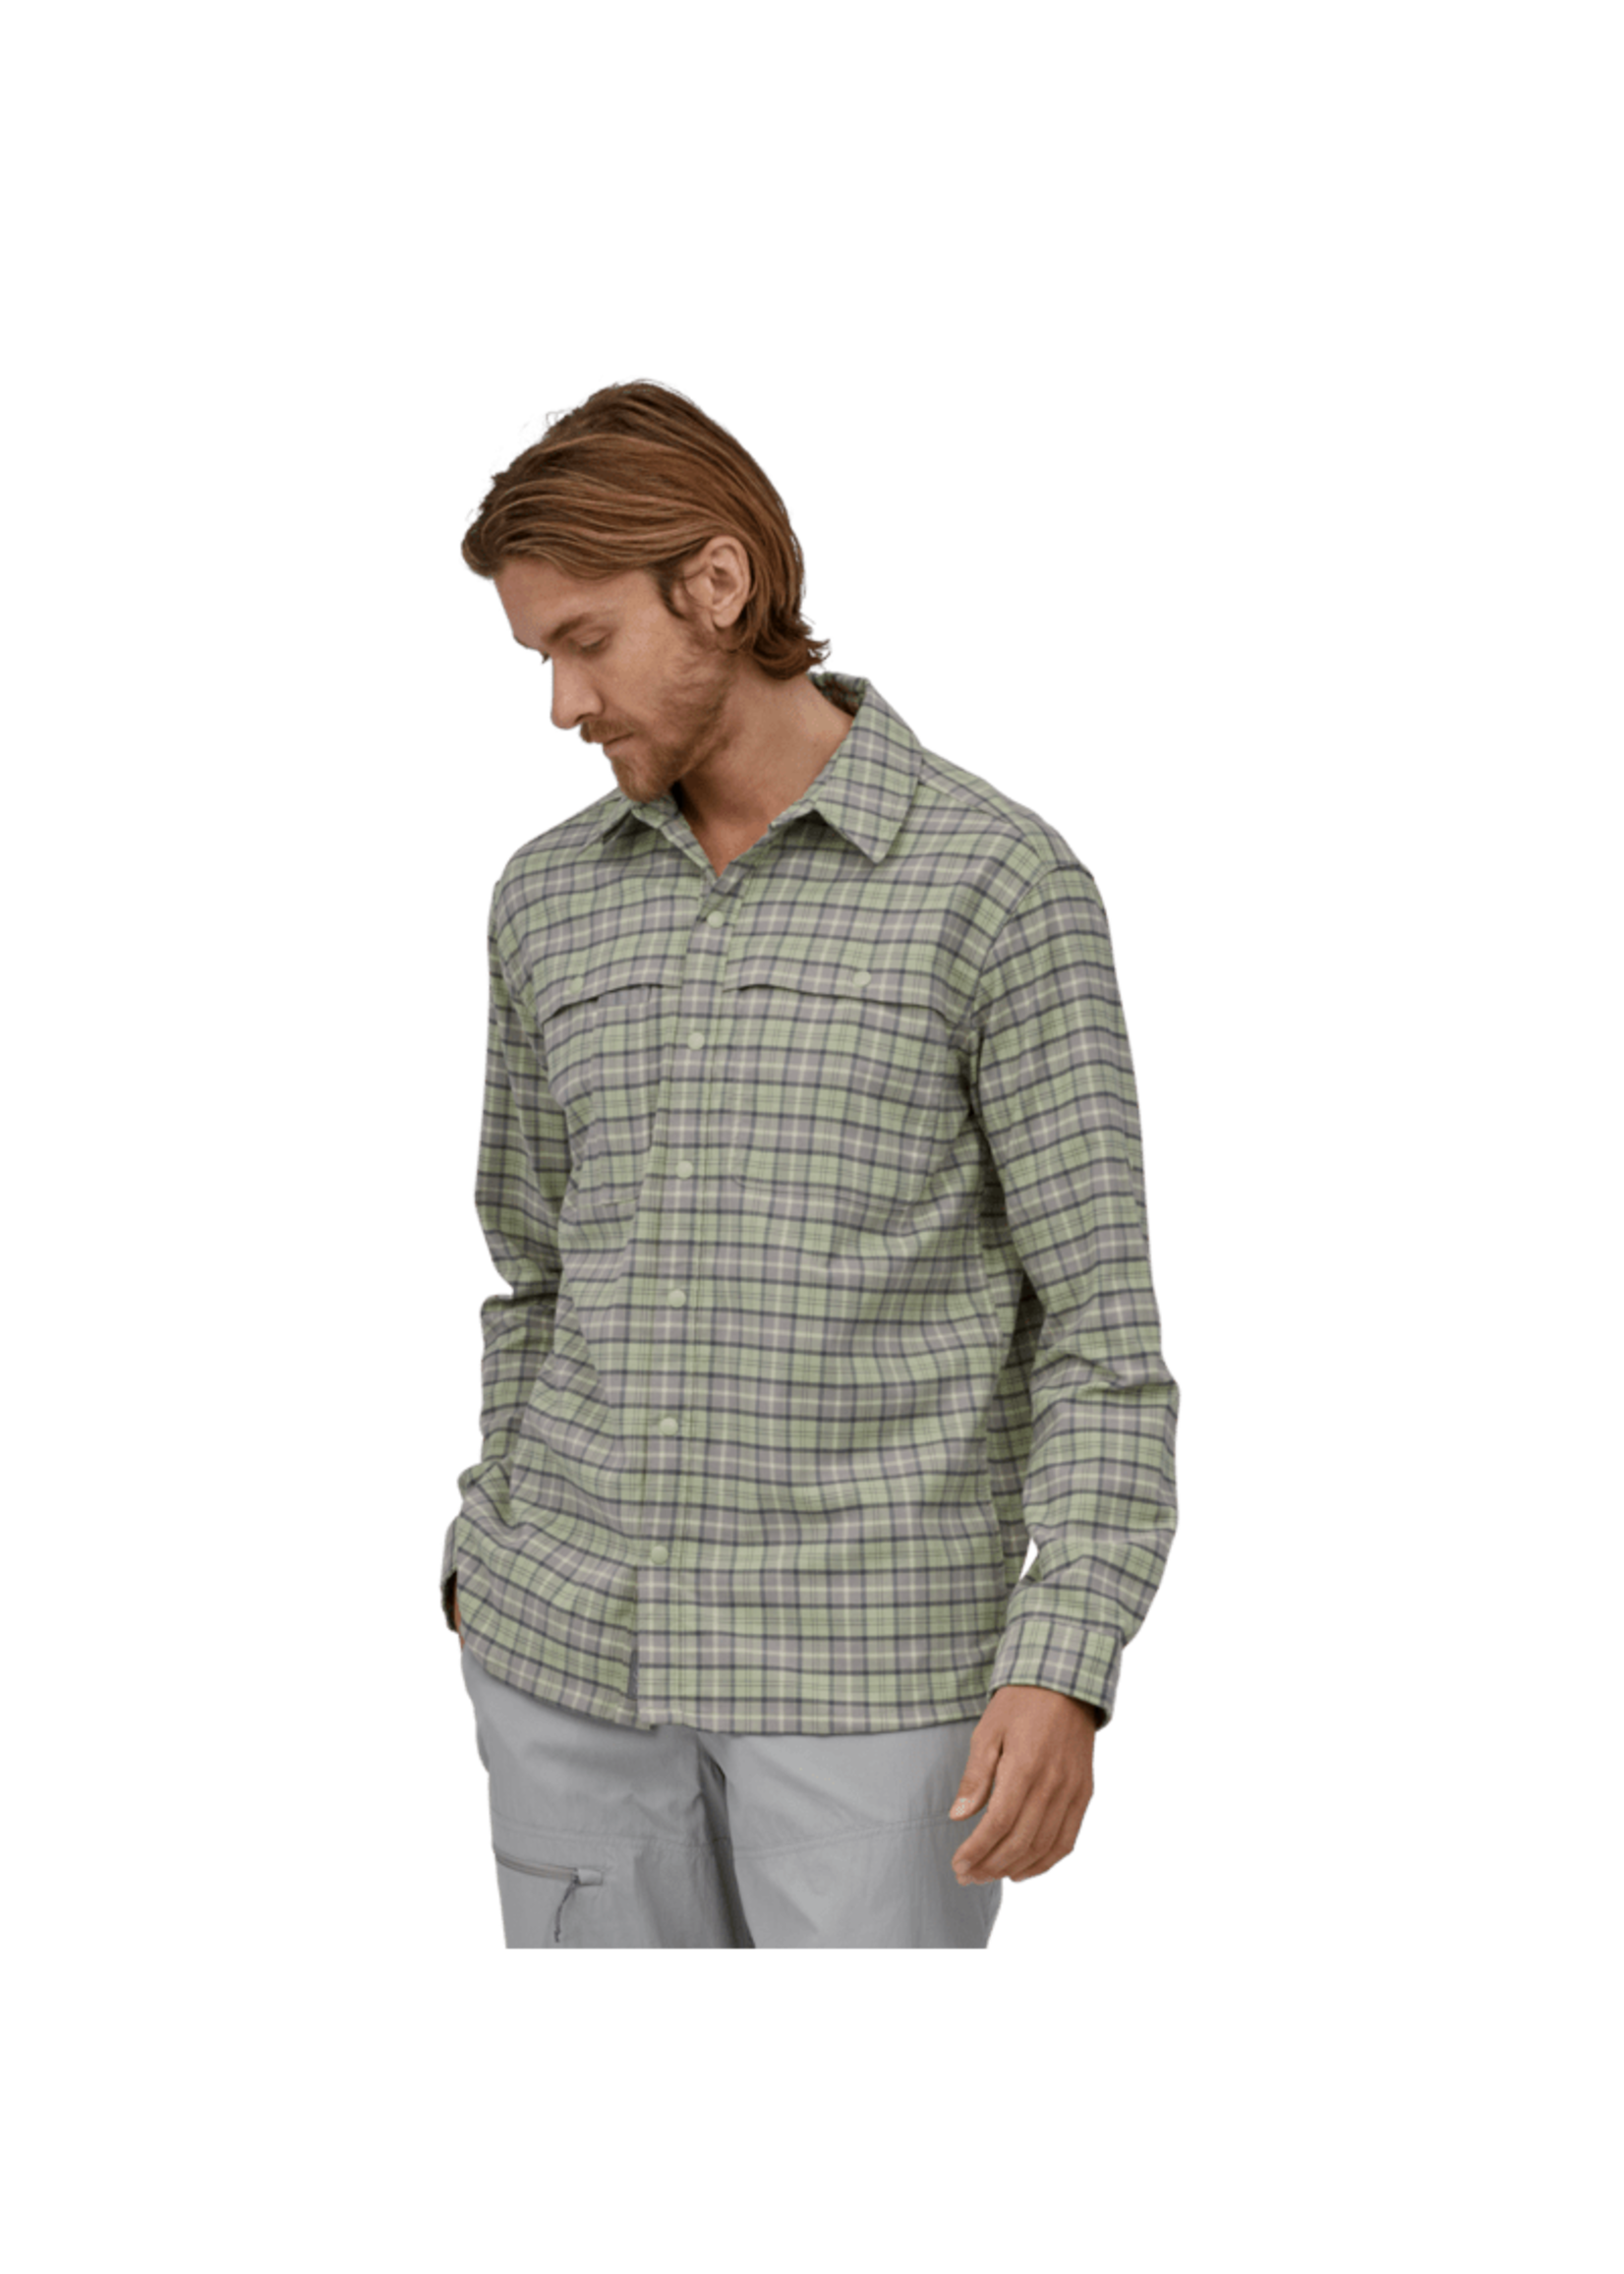 Patagonia Men's Early Rise Stretch Shirt - On the Fly: Salvia Green